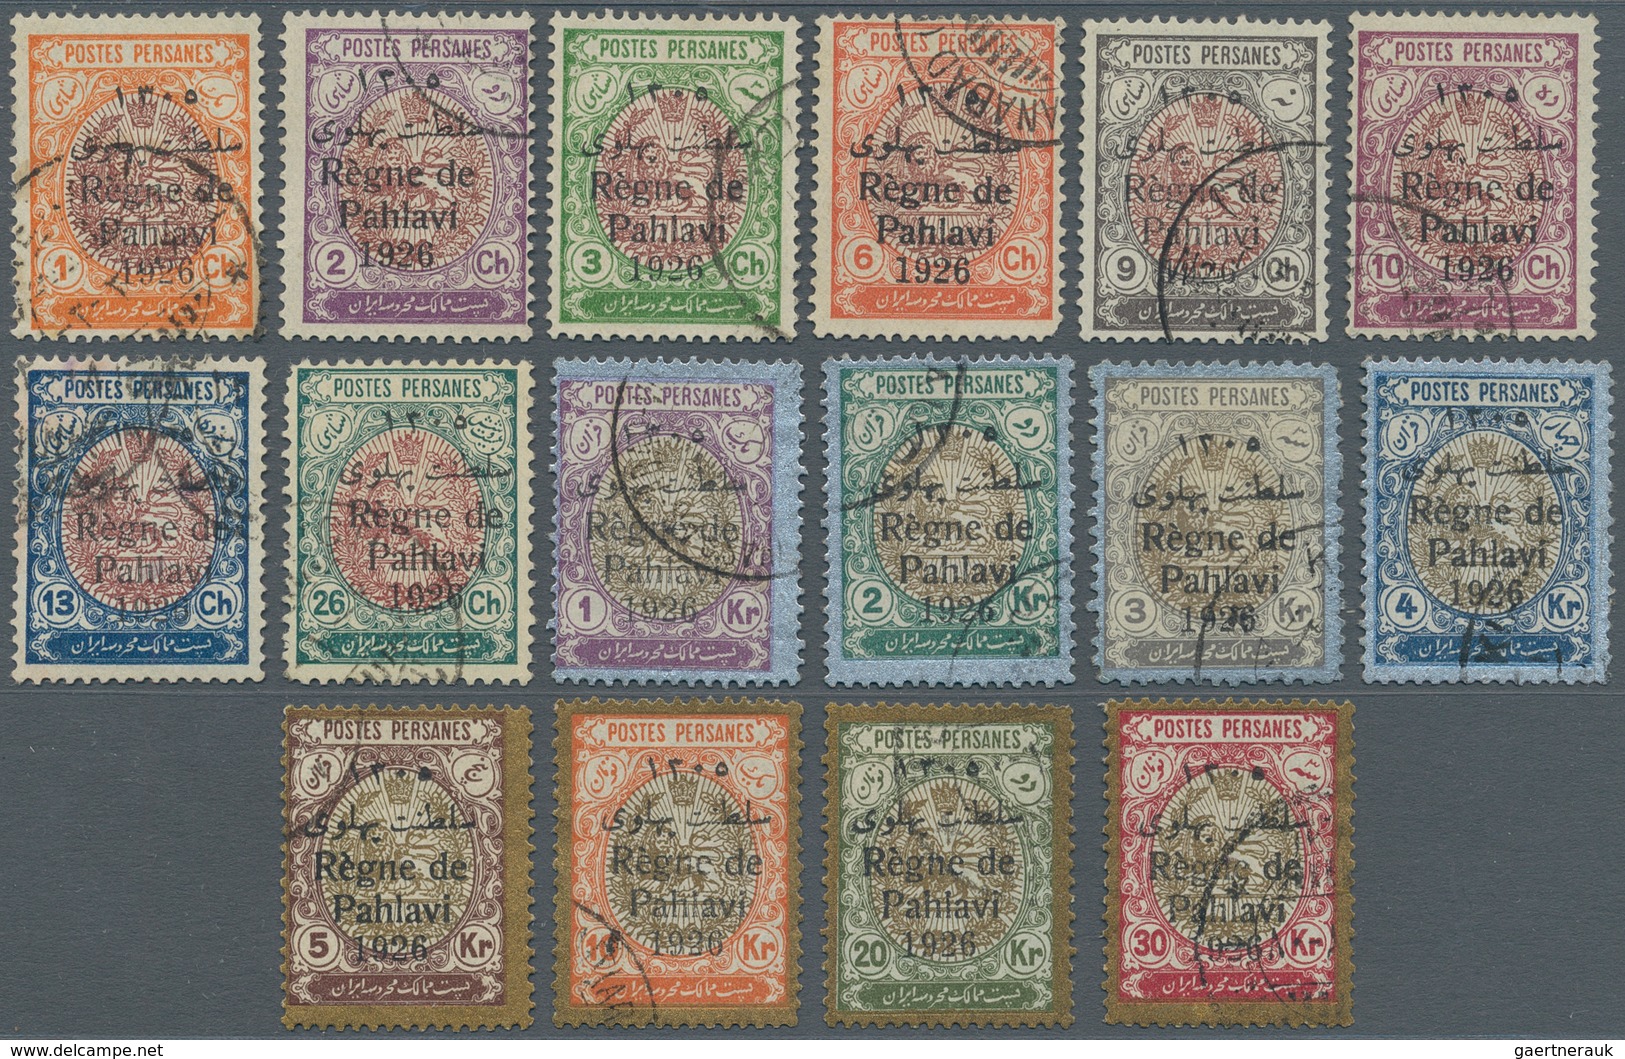 Iran: 1926, Complete Set Of 16 Values On Thin Paper, All Fine Cancelled, A Scarce Offer. - Iran